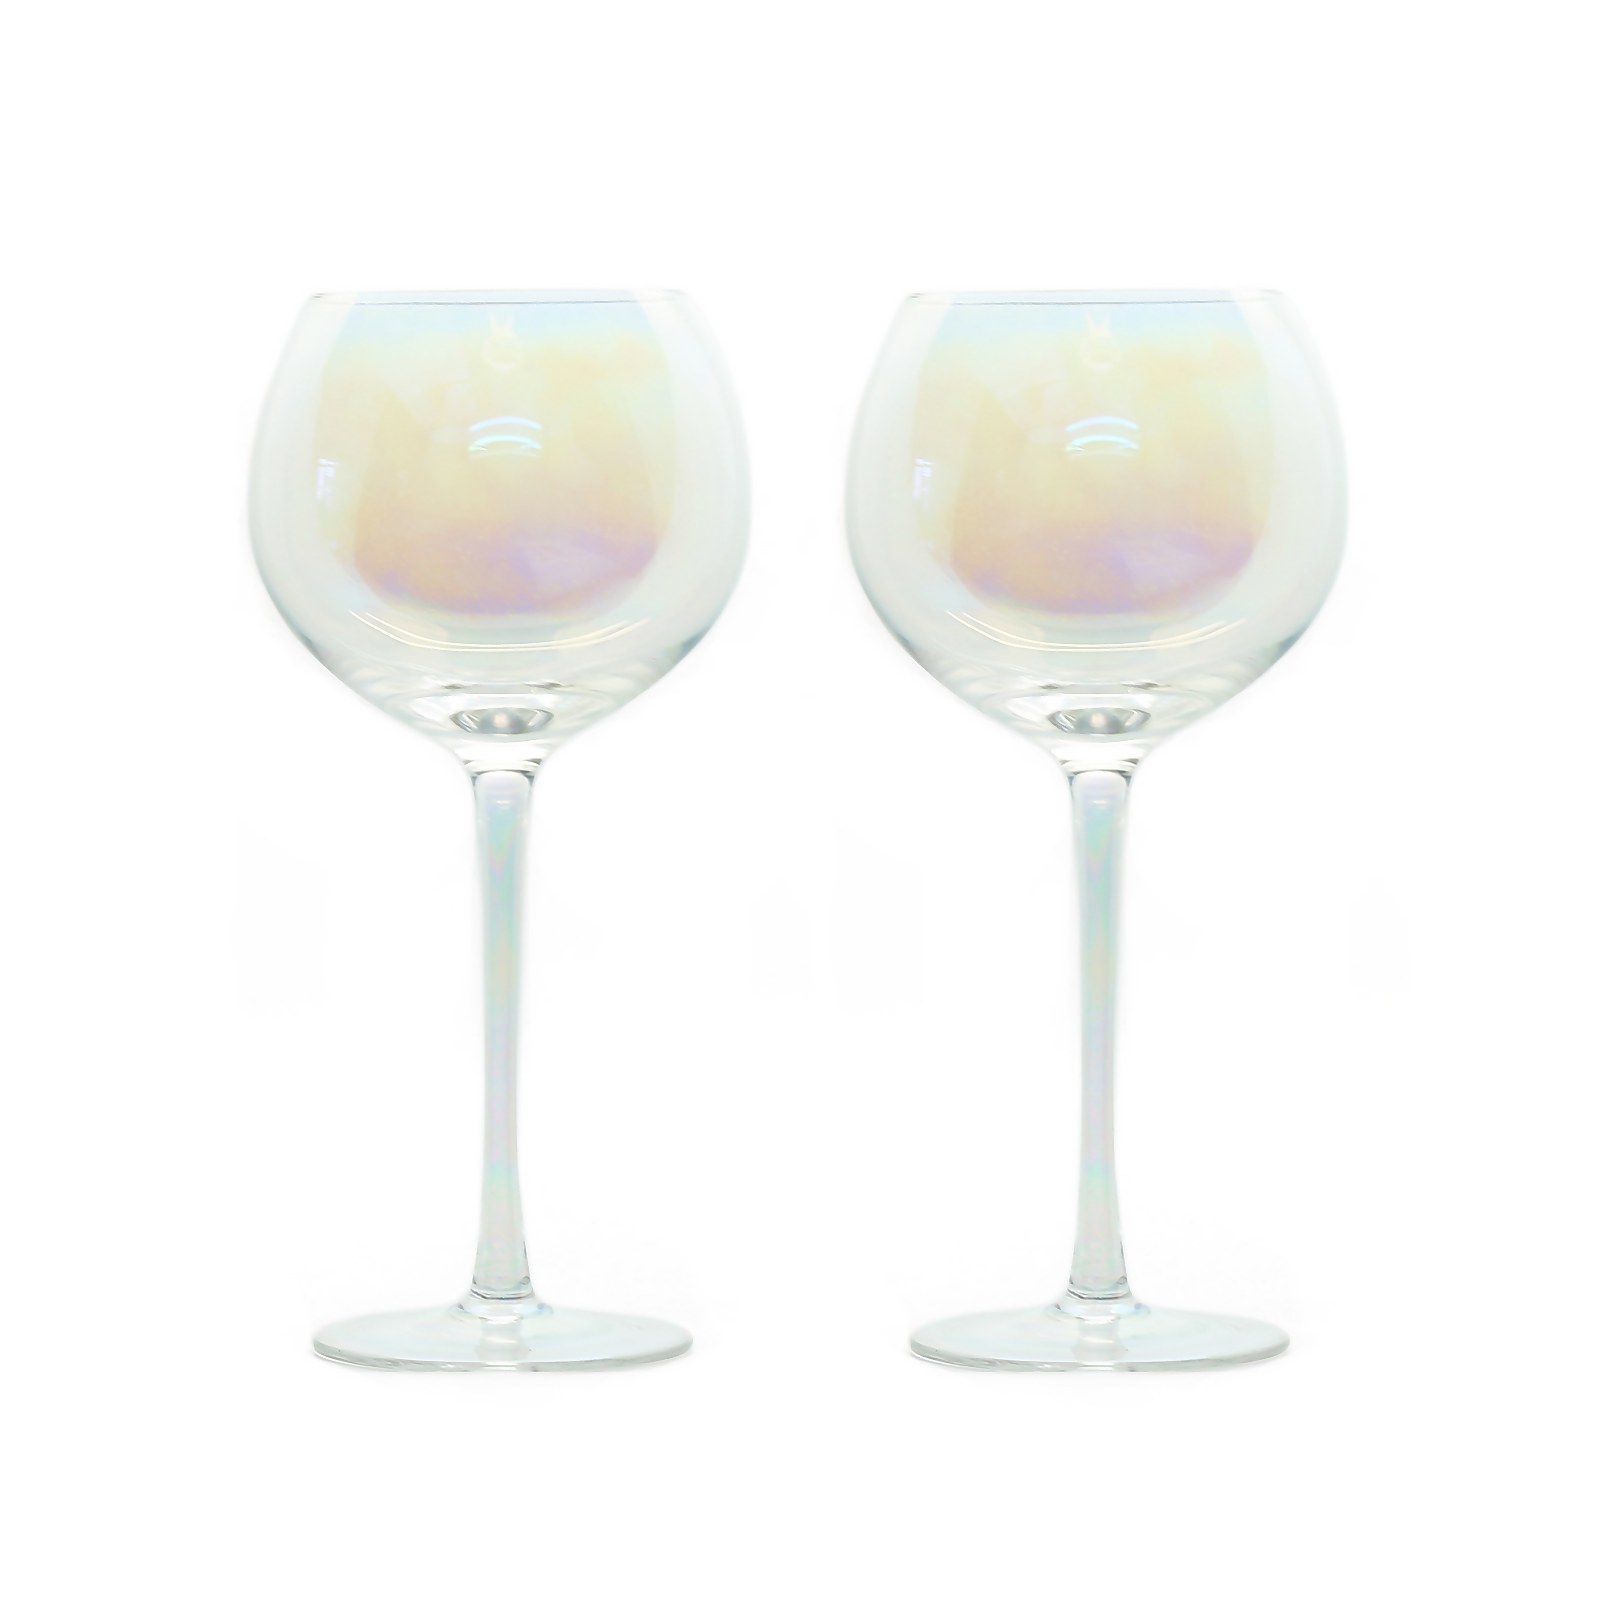 Photo of Large Lustre Gin Glasses - Set Of 2